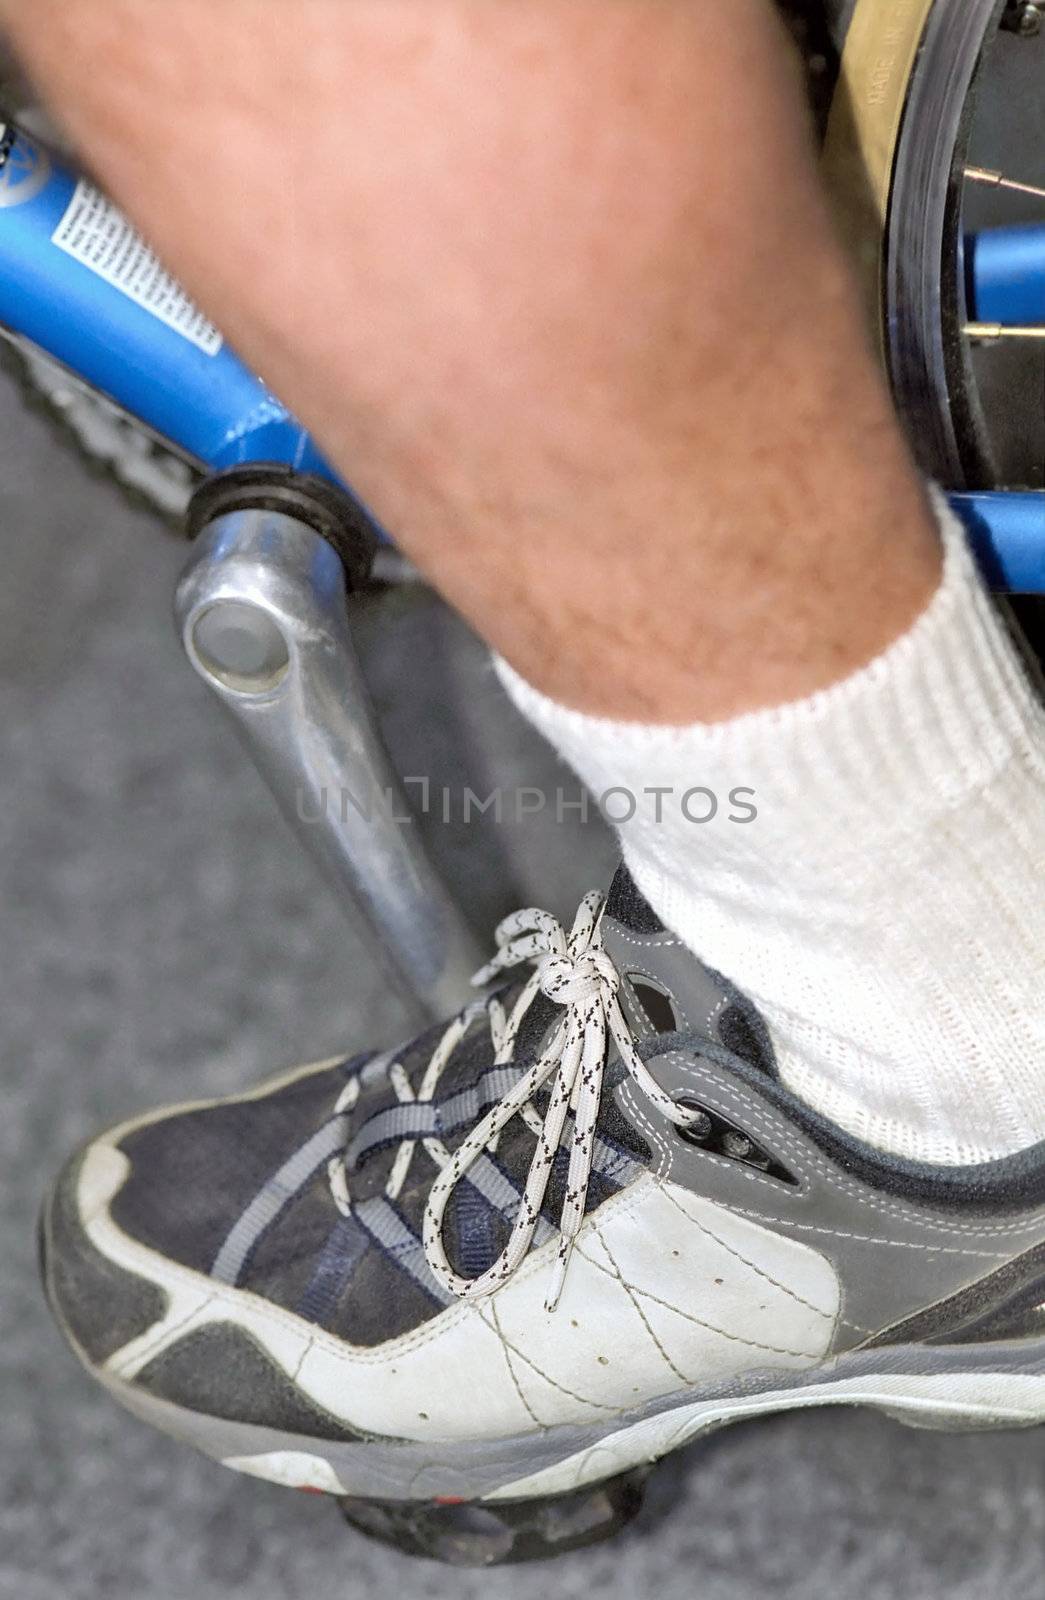 Pedaling man's leg in sporting sock and shoe